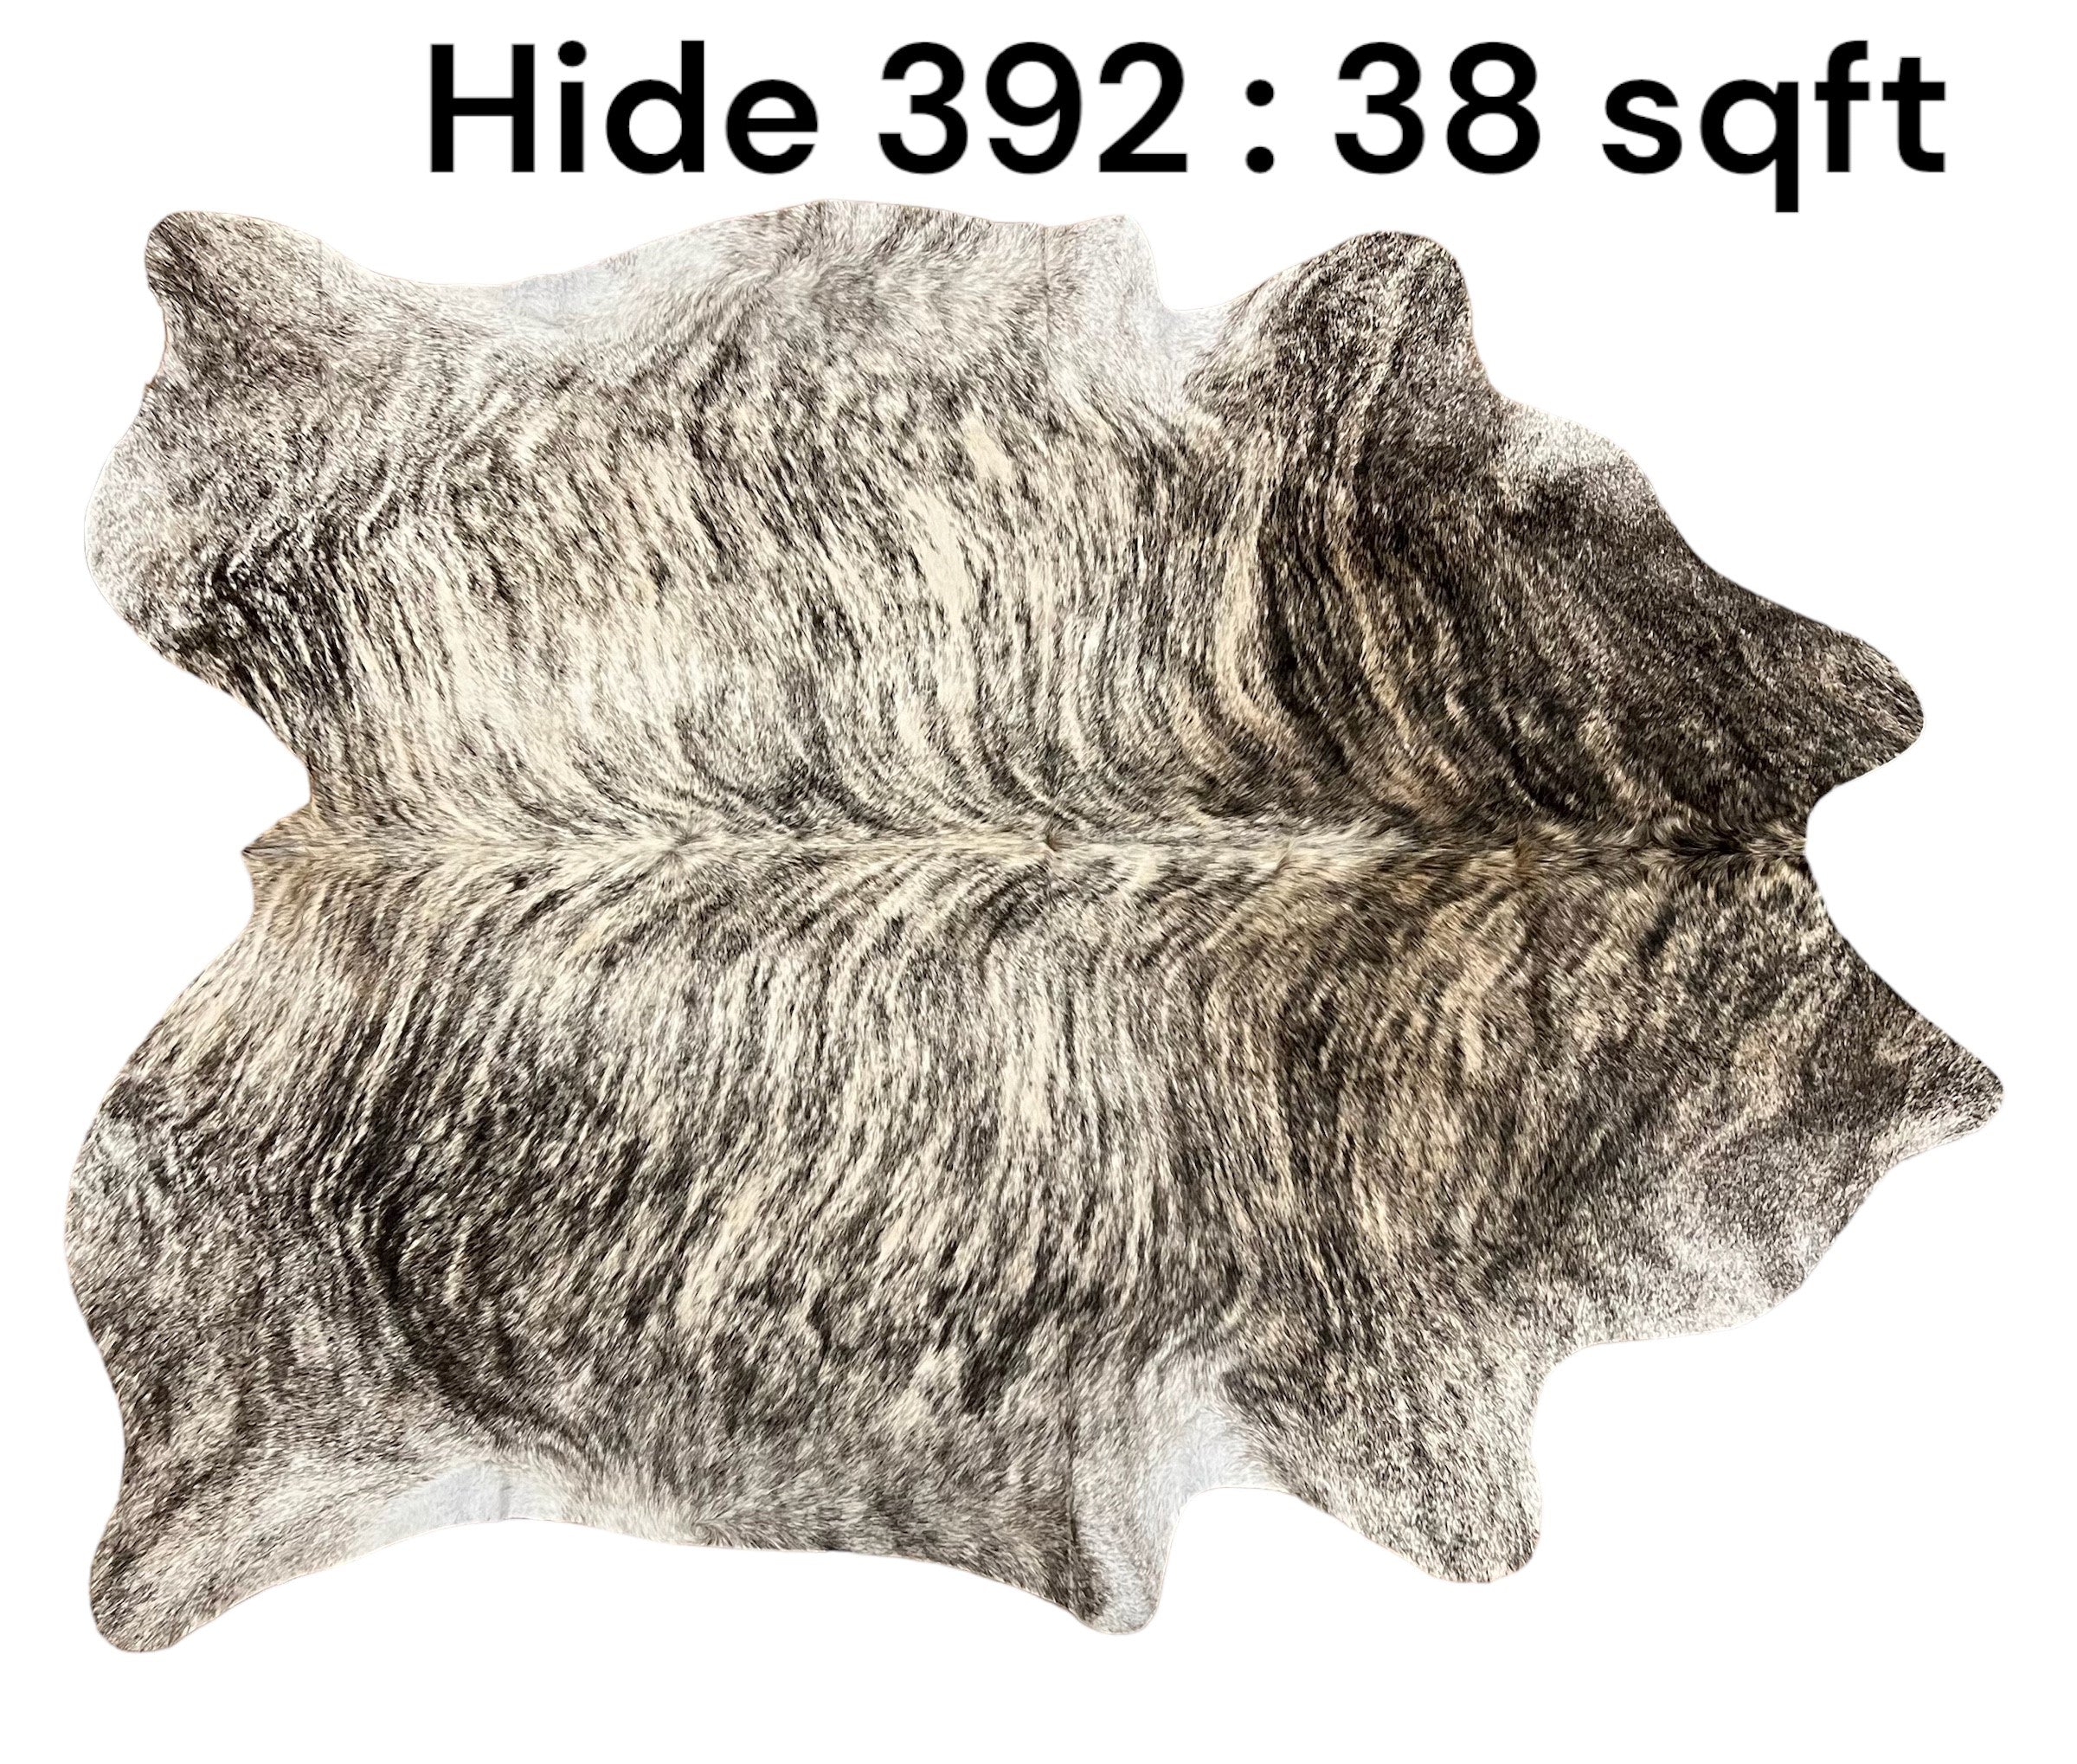 Natural Hair On Cow Hide : This Hide Is Perfect For Wall Hanging, Leather Rugs, Leather Upholstery & Leather Accessories. (Hide392)